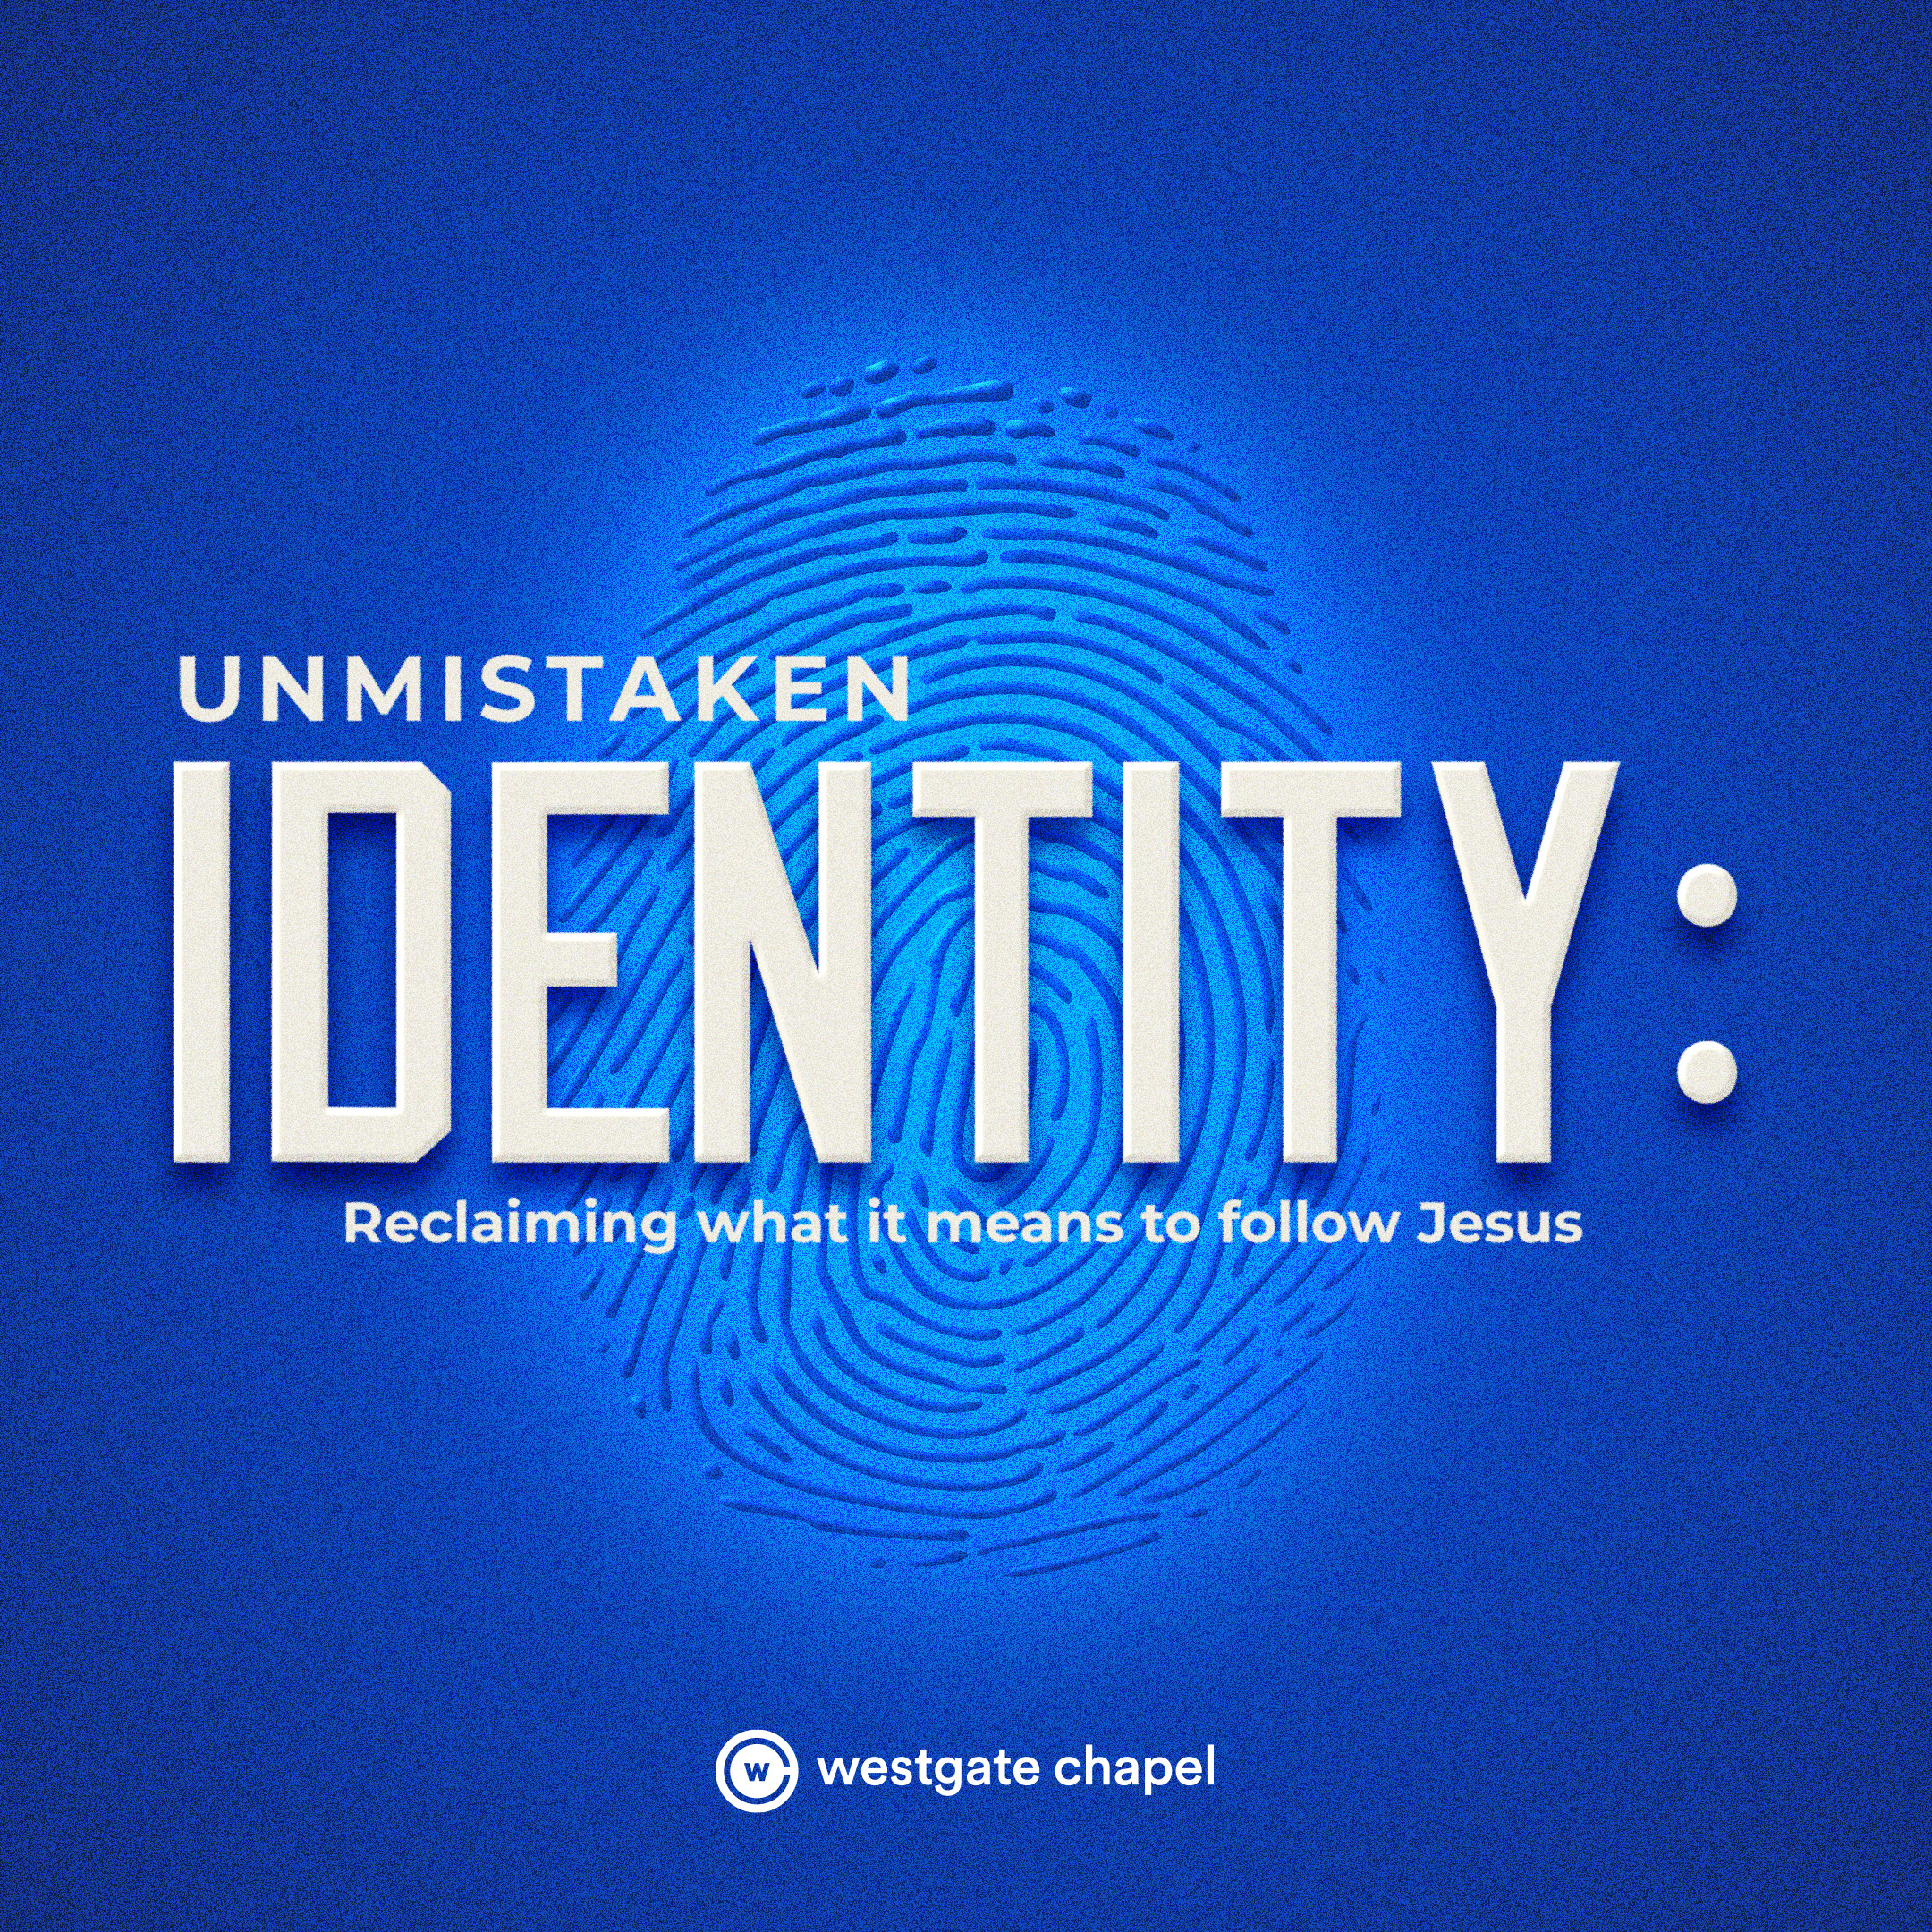 UnMistaken Identity: From Independence to Dependence - John 15:1-16